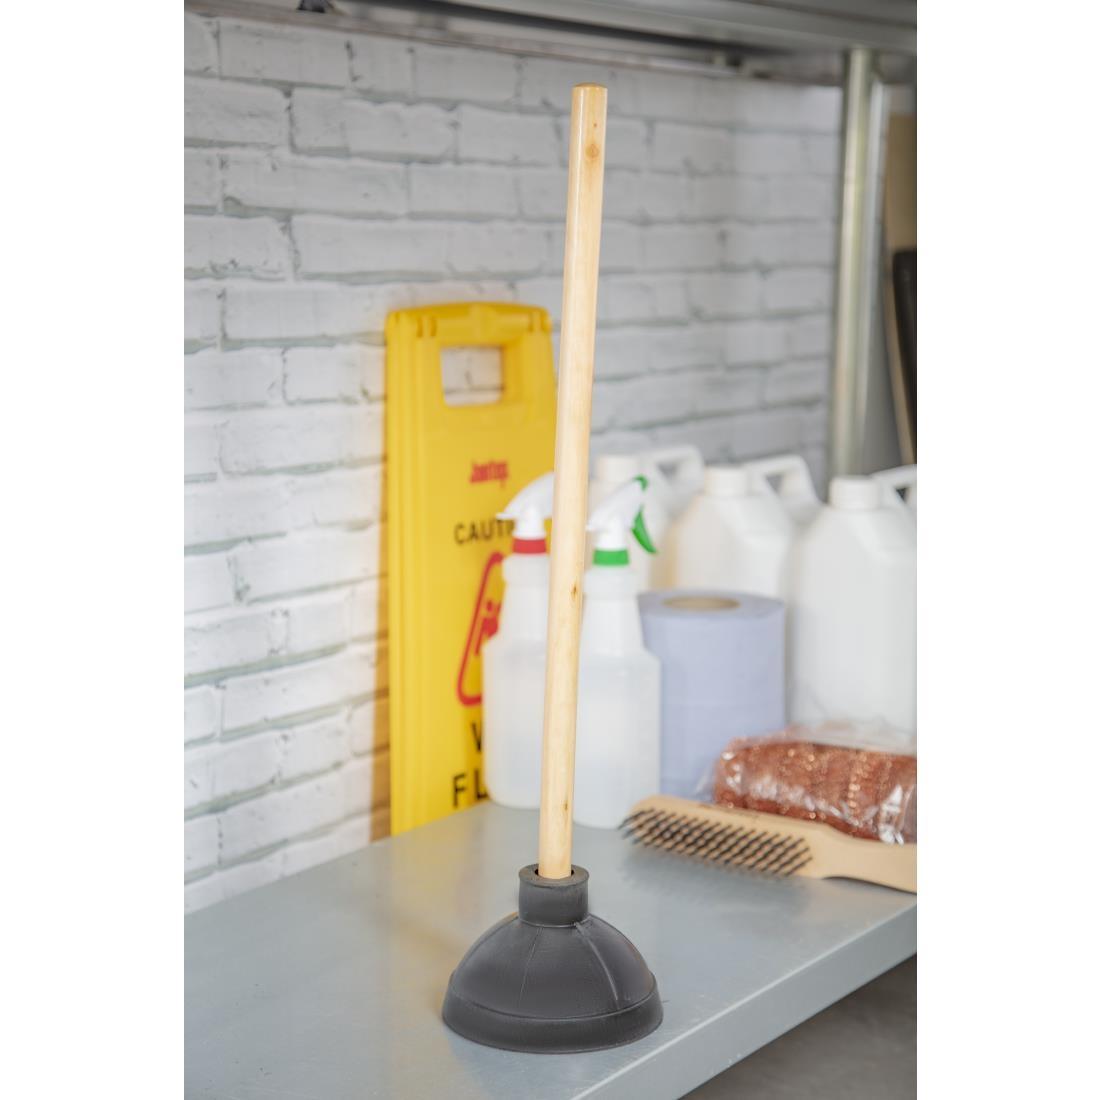 Jantex Plunger With Wooden Handle - CG047  - 2